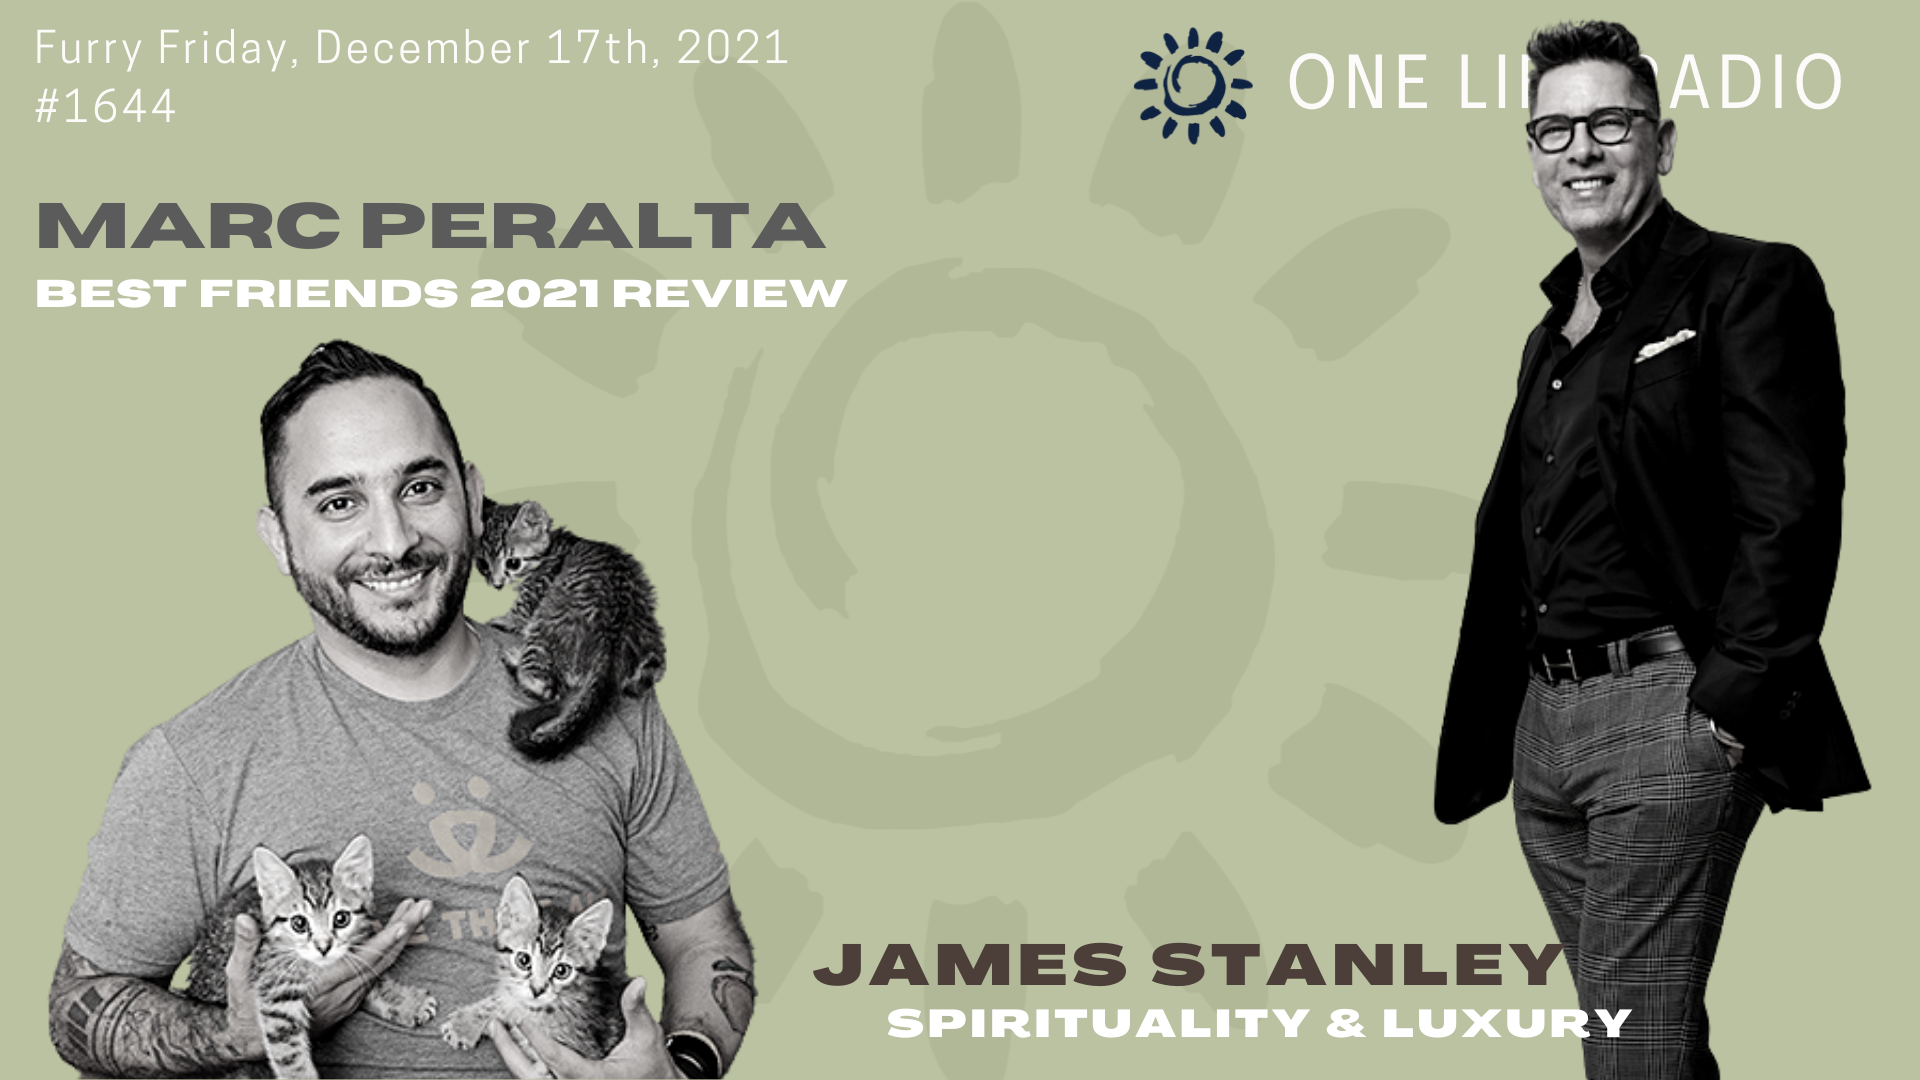 James Stanley interview with One Life Radio: URRY FRIDAY Marc Peralta - Best Friends 2021 Recap, James Stanley - Balancing Spirituality and Luxury in the Home #1644